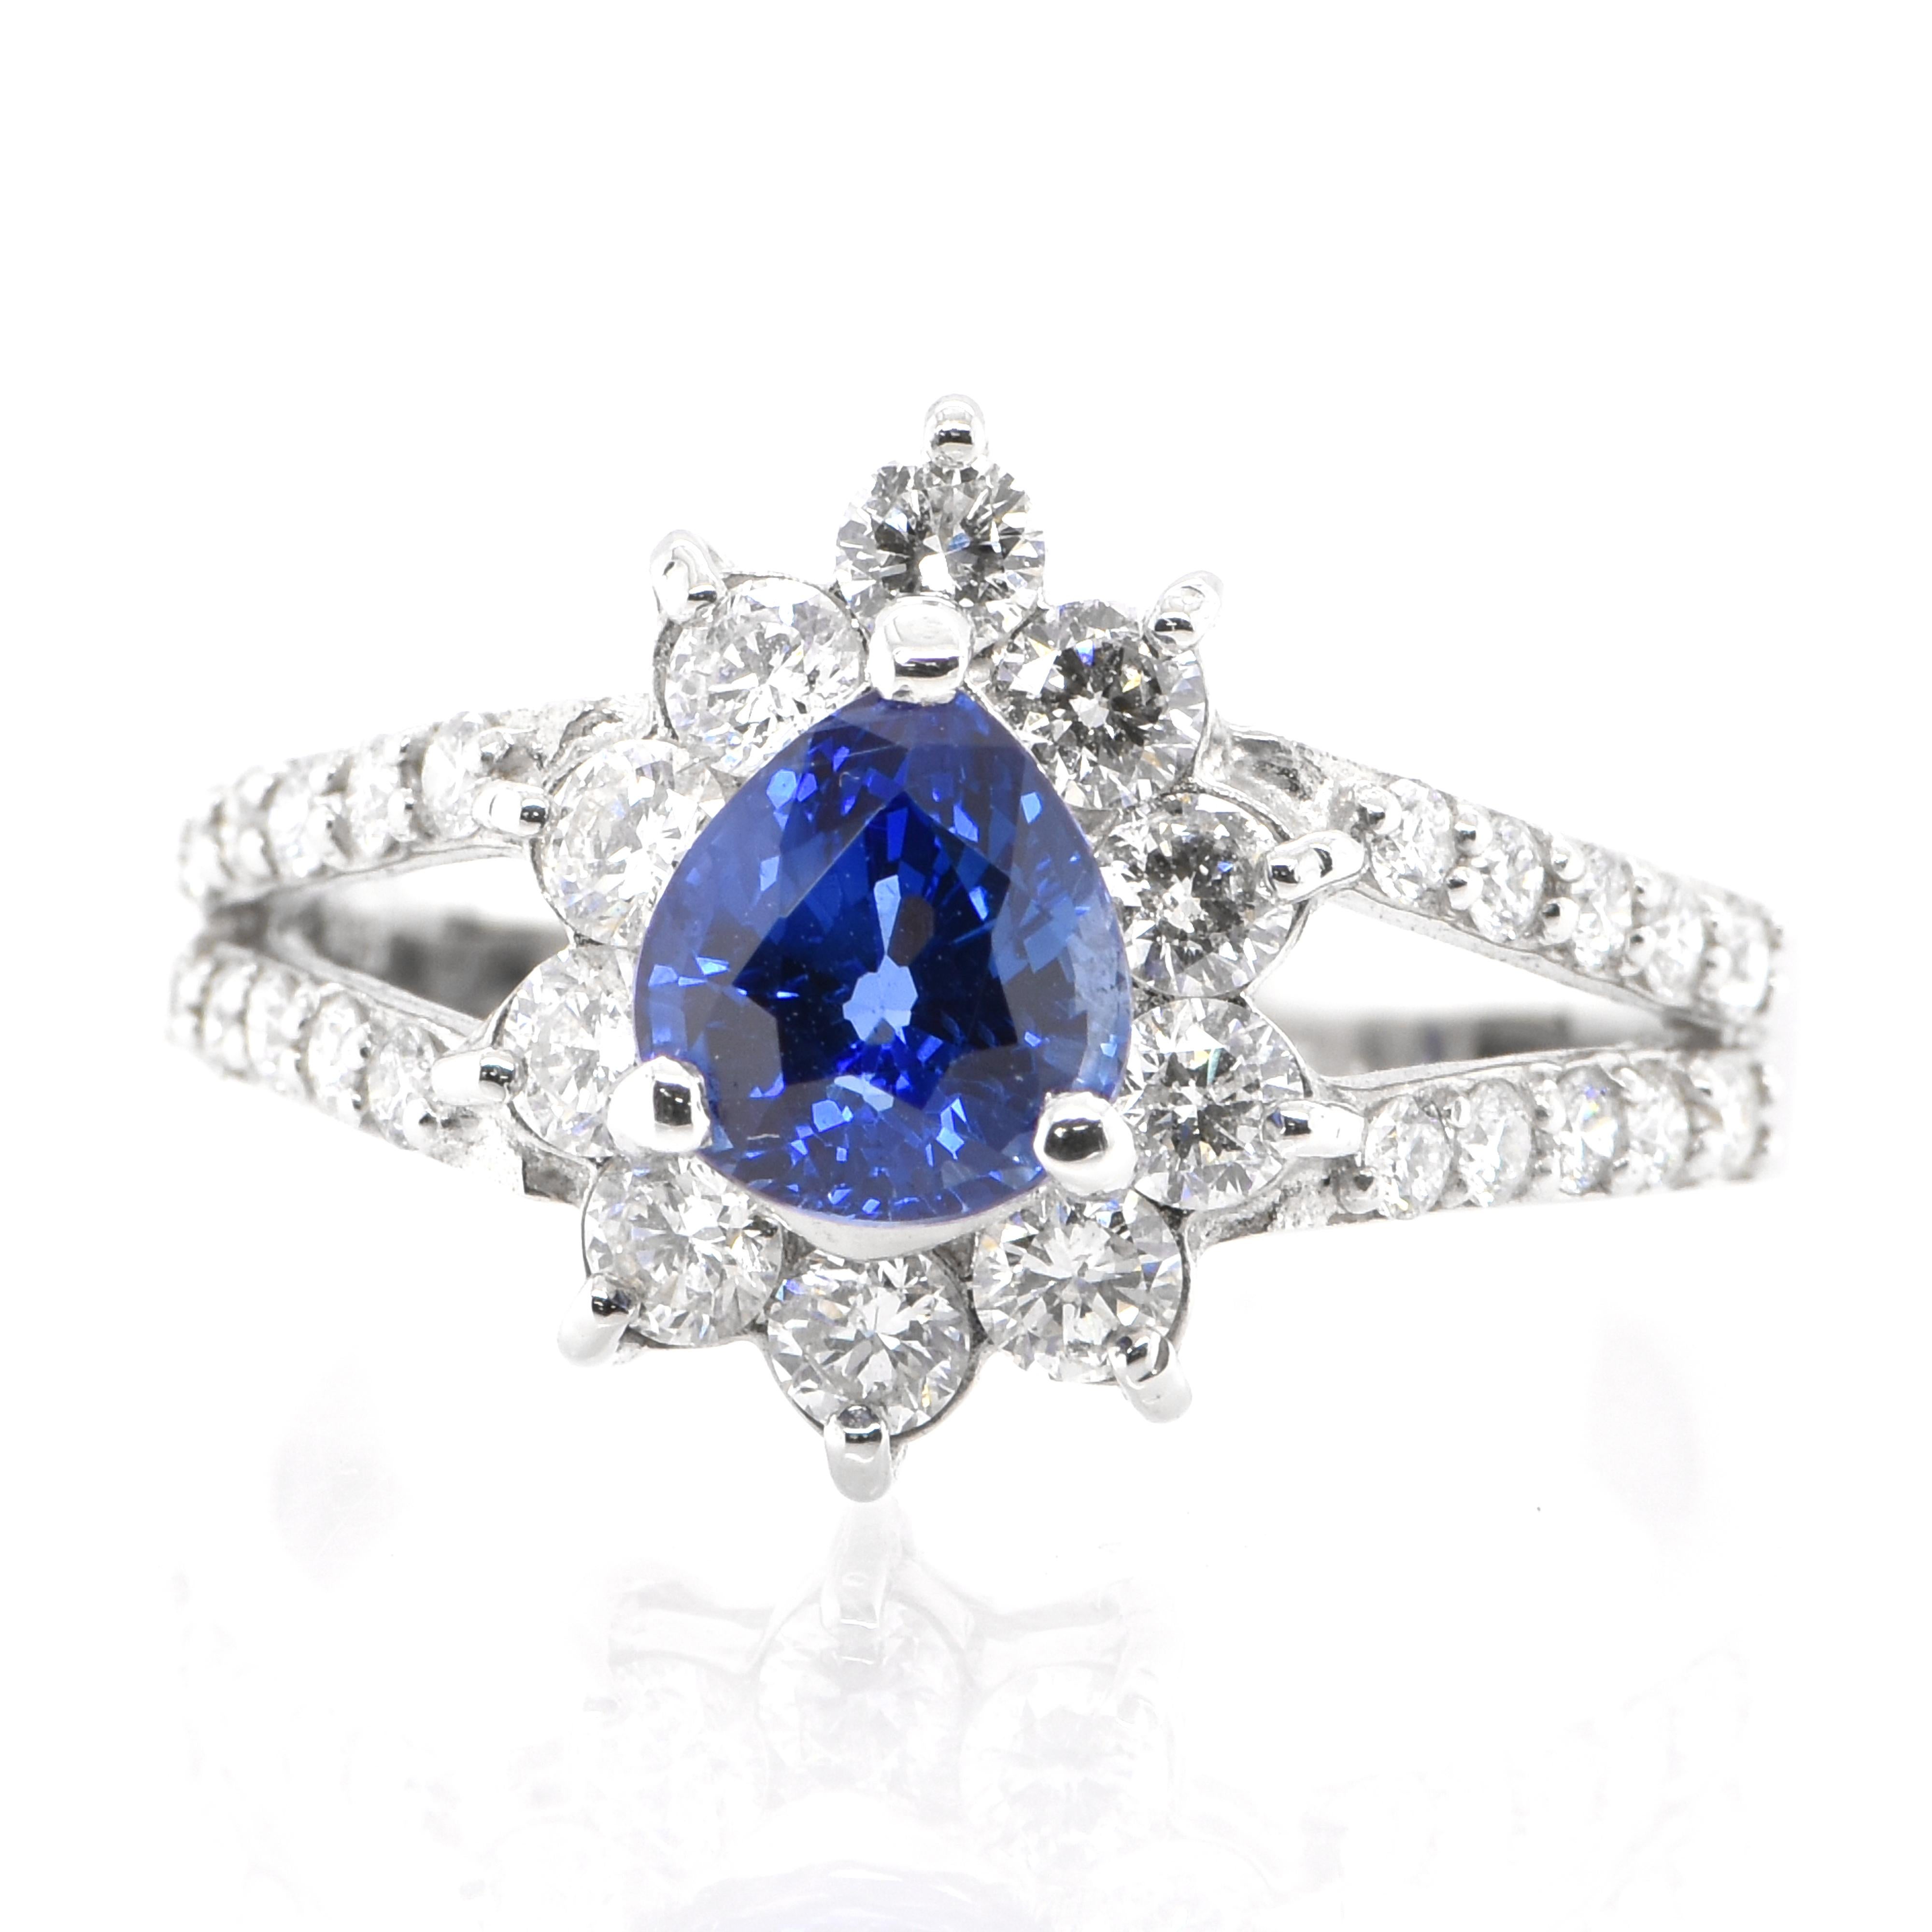 A beautiful ring featuring 1.24 Carat, Natural Sapphire and 0.73 Carats Diamond Accents set in Platinum. Sapphires have extraordinary durability - they excel in hardness as well as toughness and durability making them very popular in jewelry.